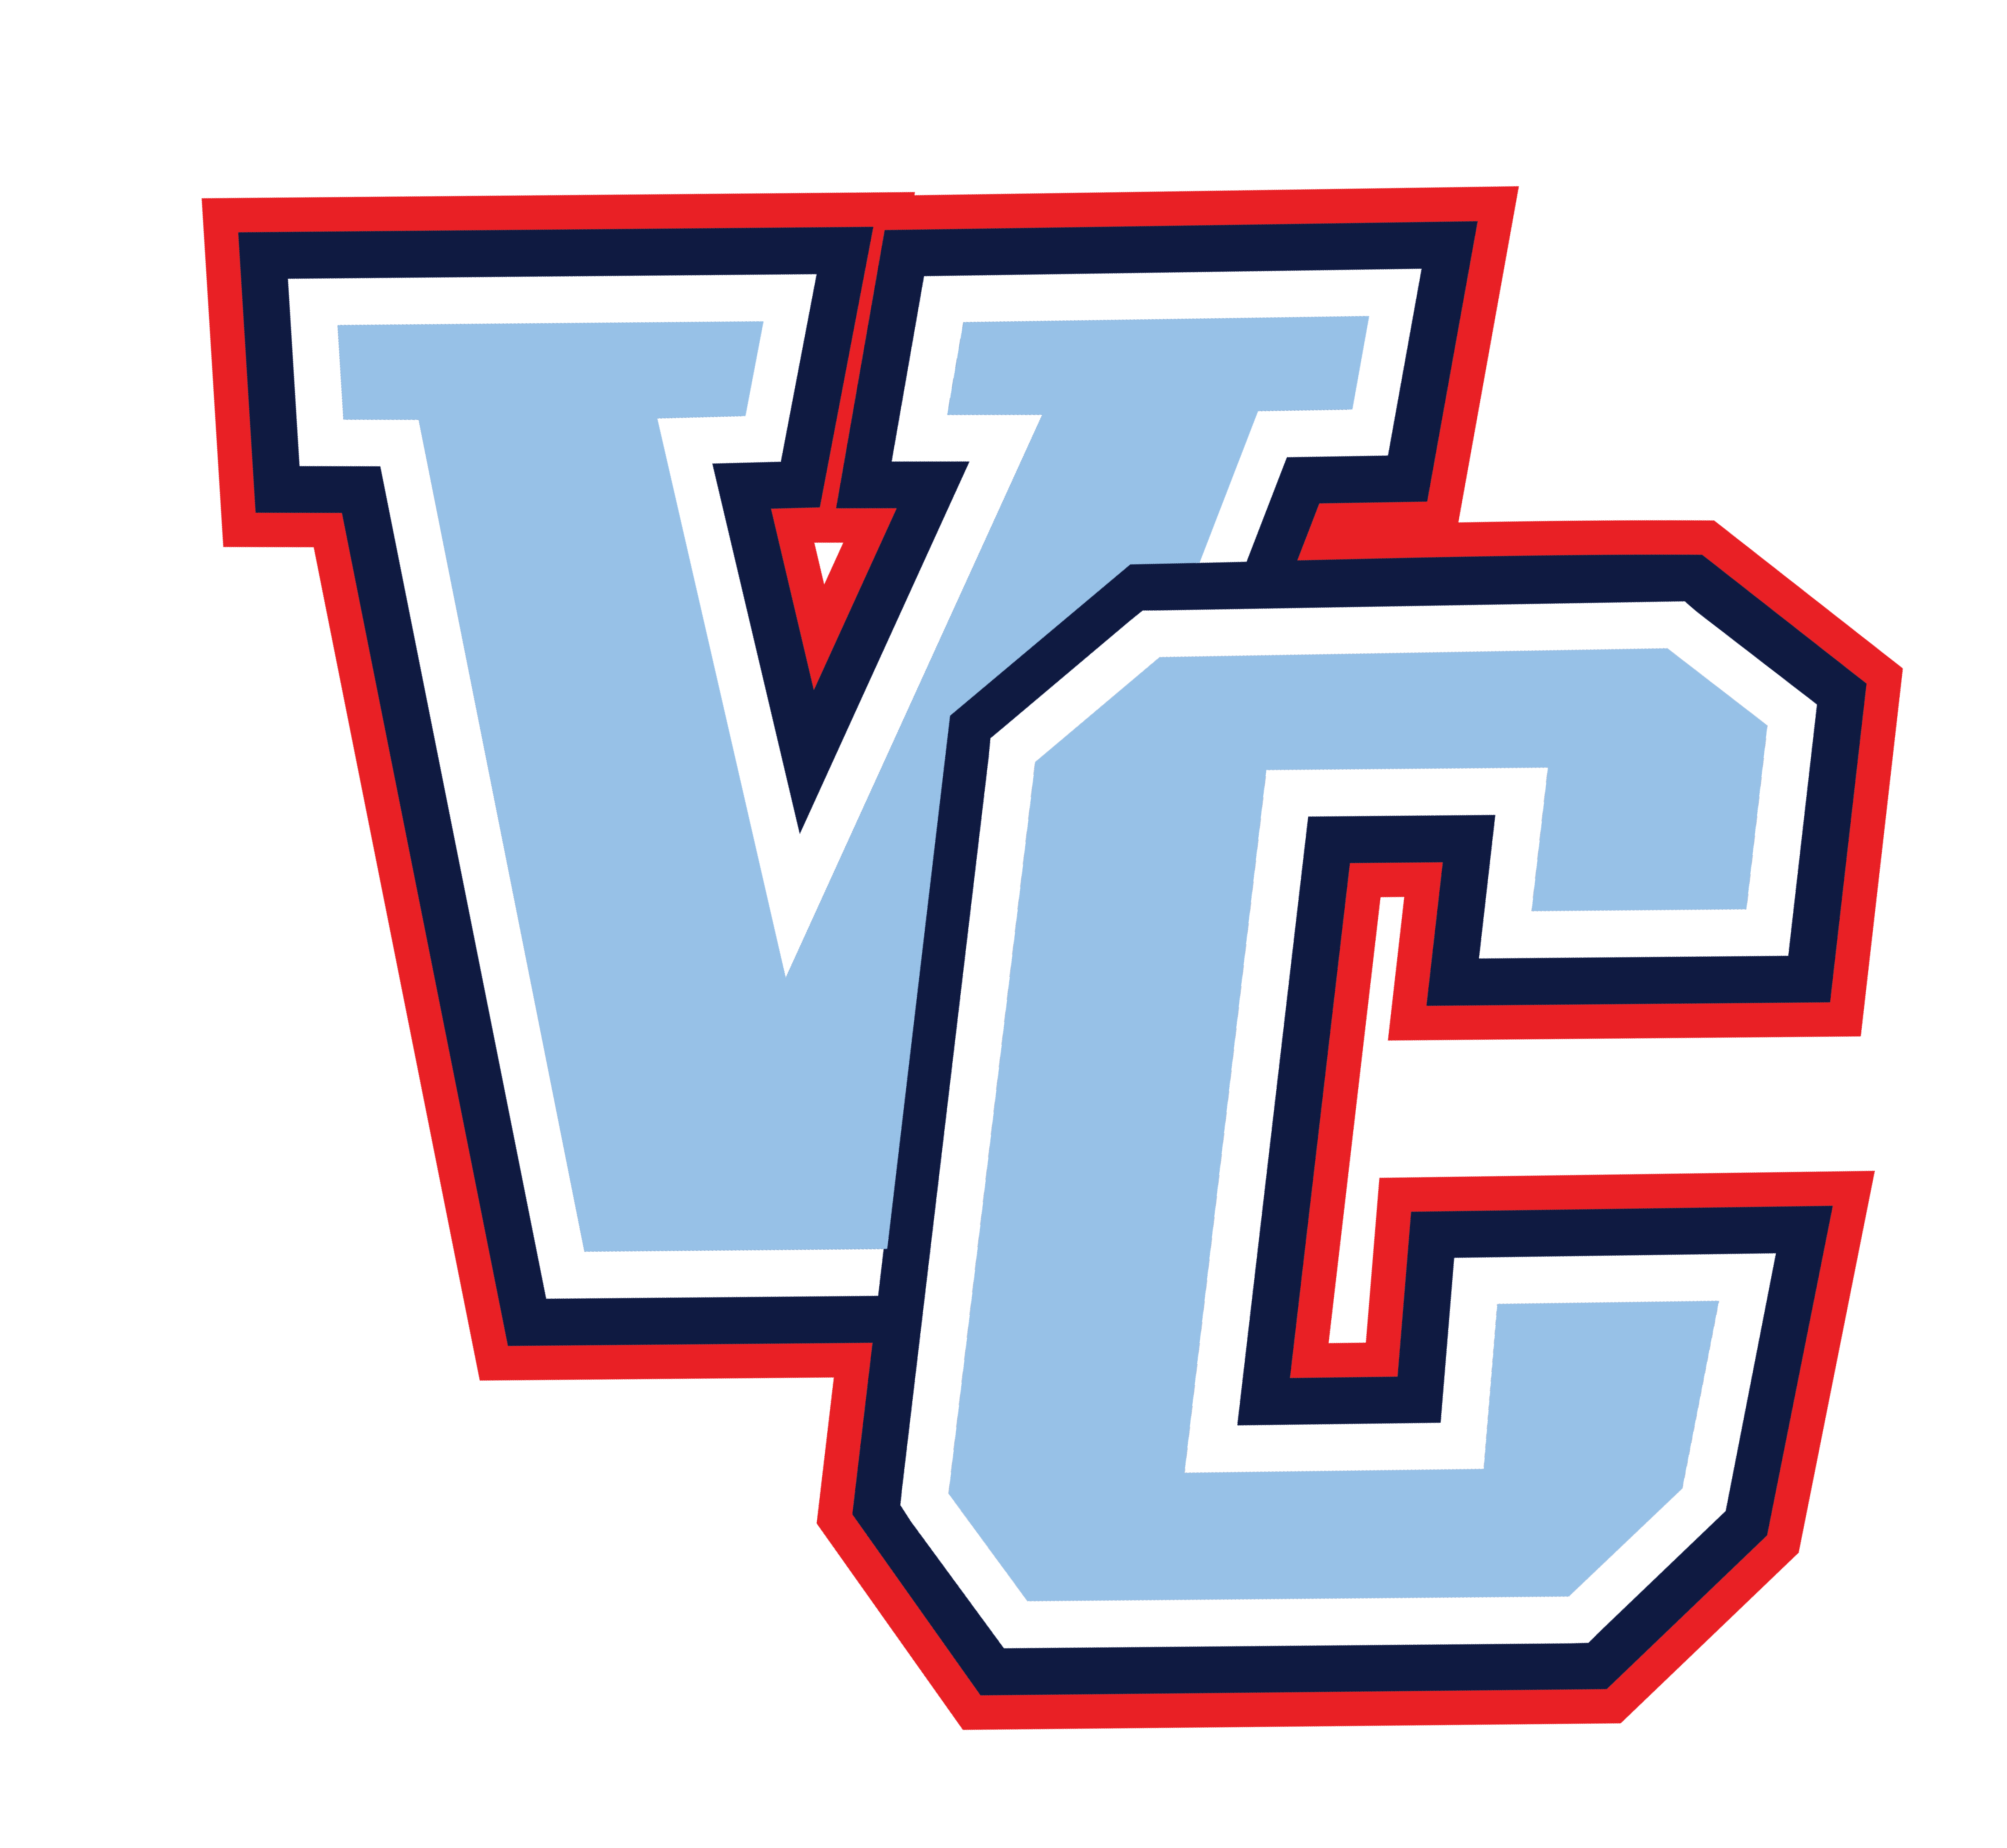 vc-logo-with-red